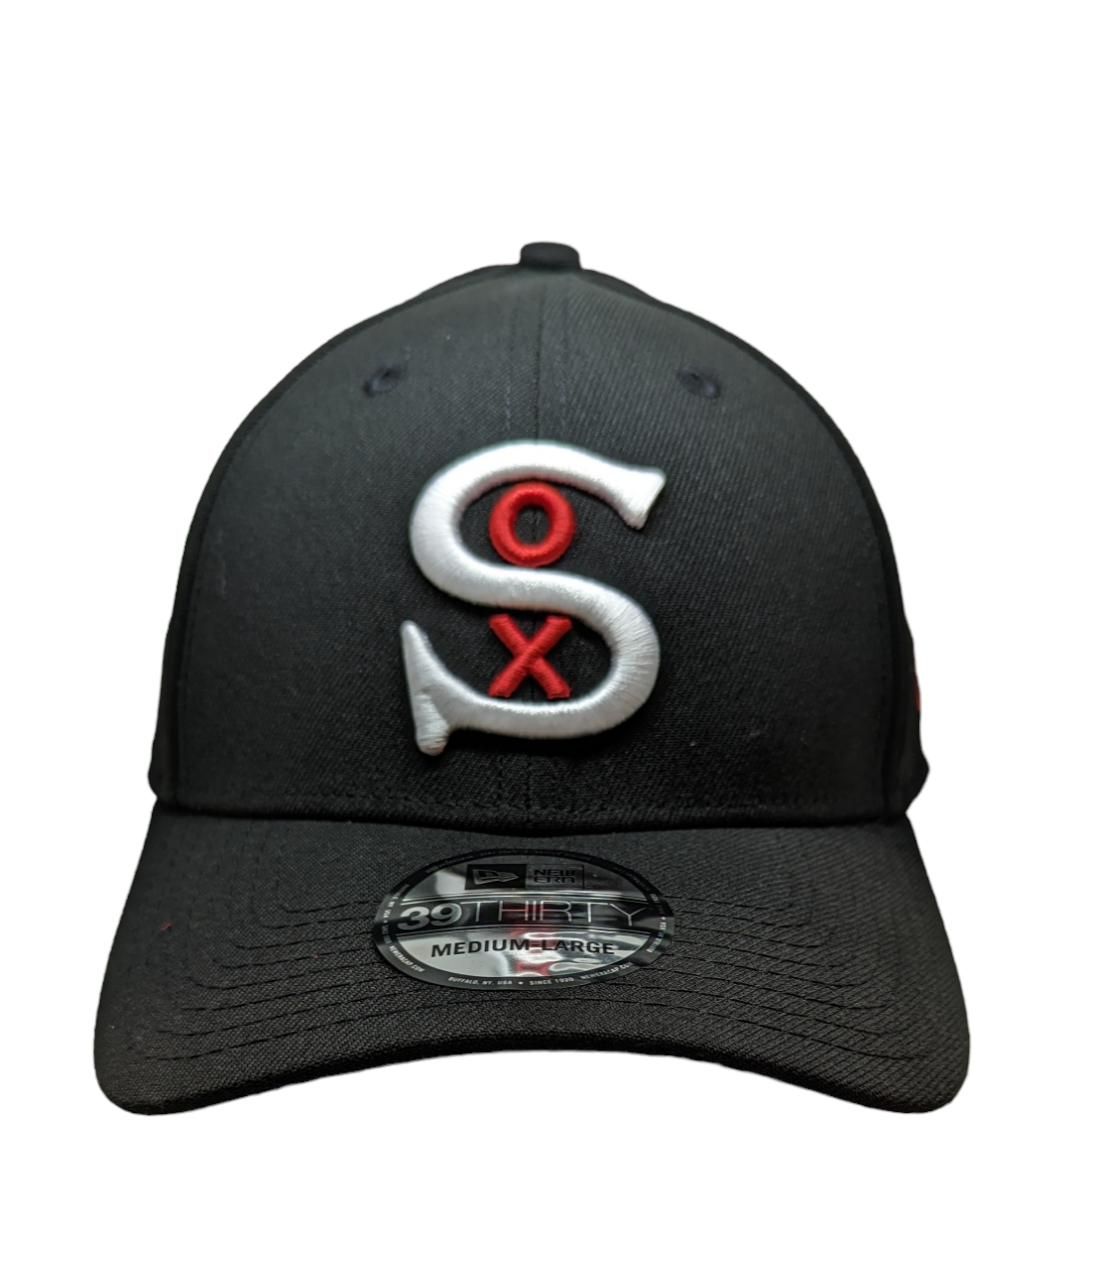 Mens Chicago White Sox 1917 Black Cooperstown Collection 39THIRTY Flex Fit New Era Hat